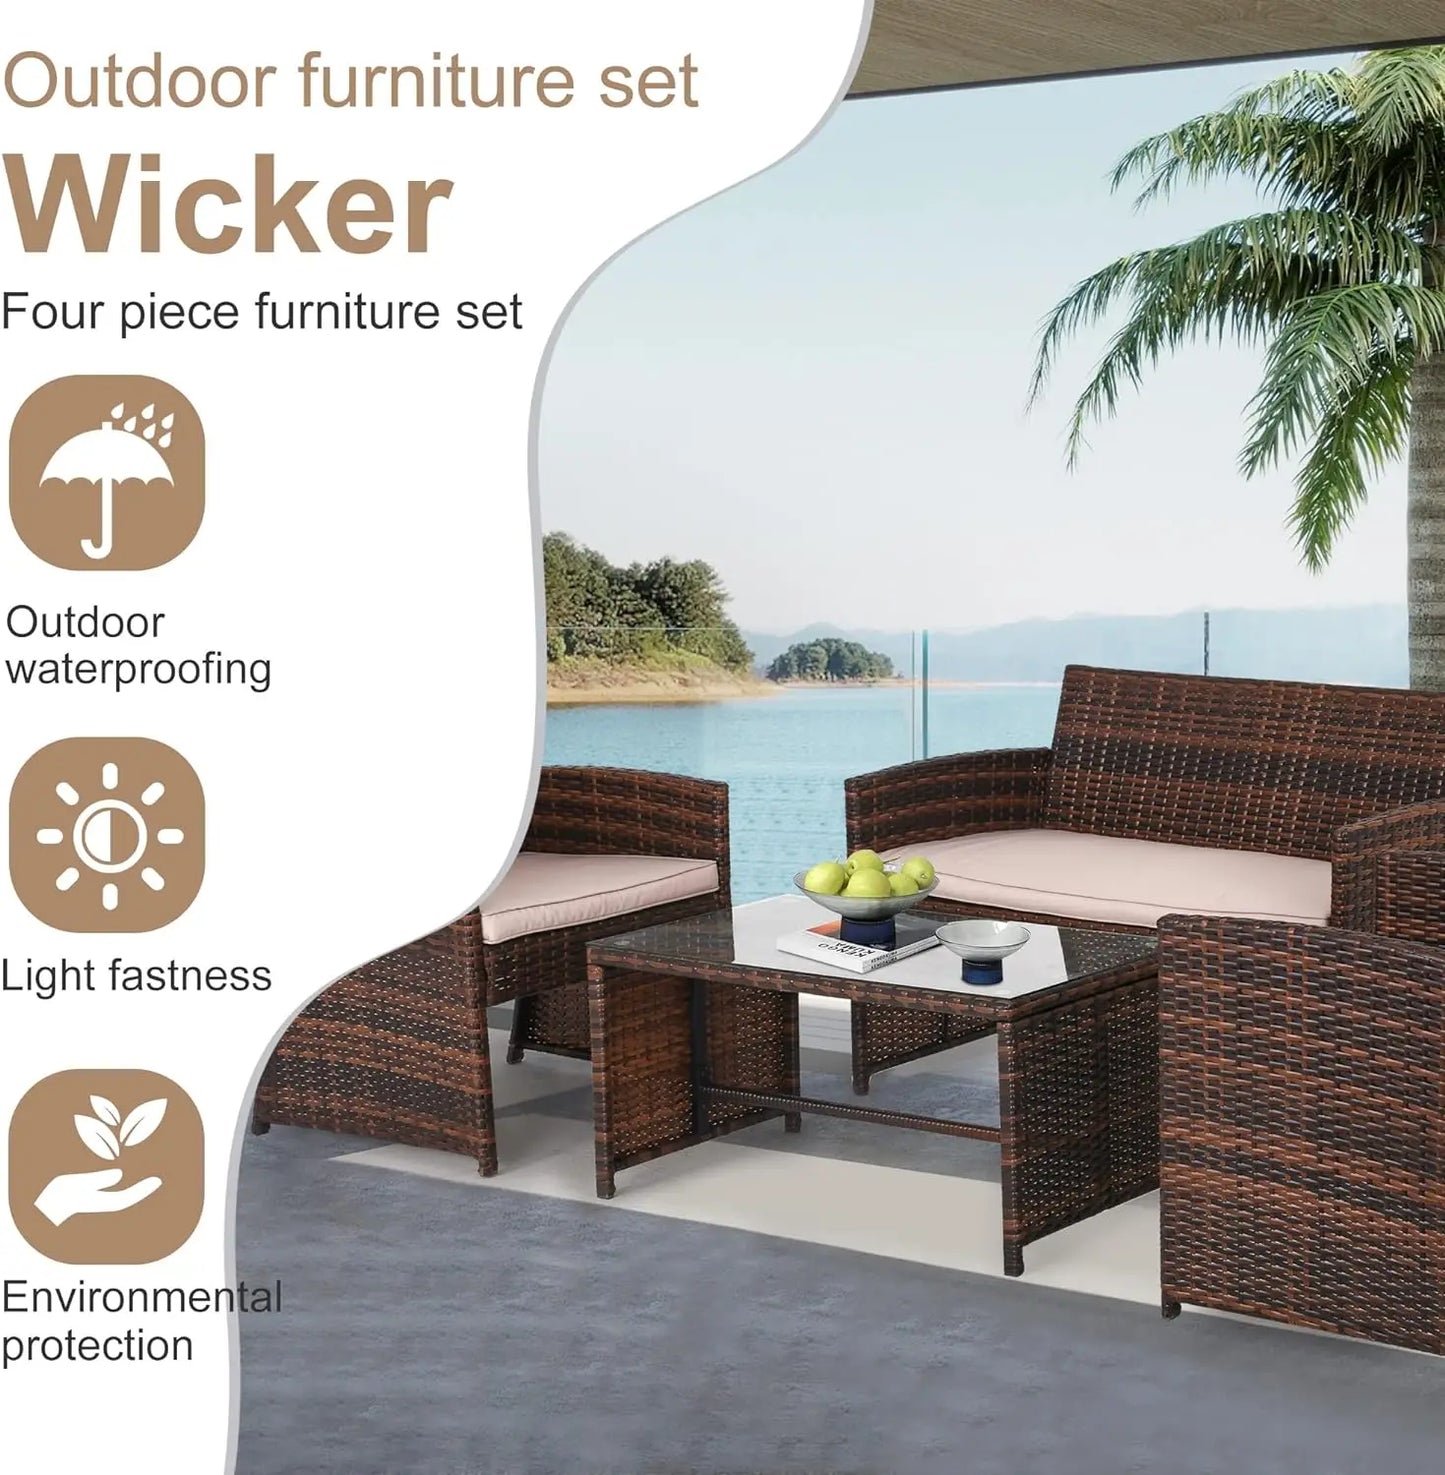 FDW 4 Pieces Outdoor Patio Furniture Sets Rattan Chair Patio Set Wicker Conversation Set Poolside Lawn Chairs Porch Poolside Bal